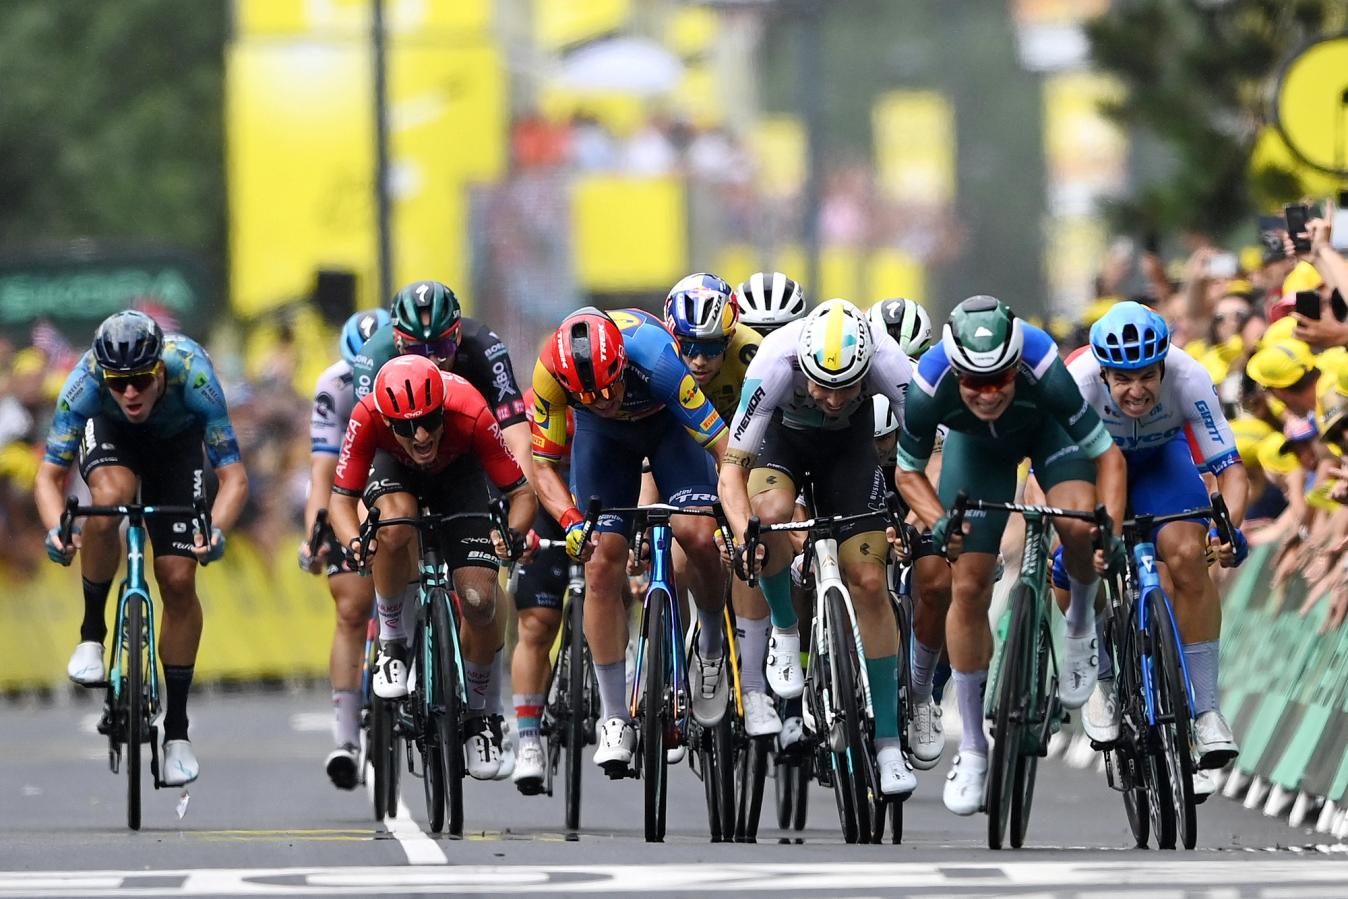 The best sprinters at full pelt during a Tour de France stage finale 